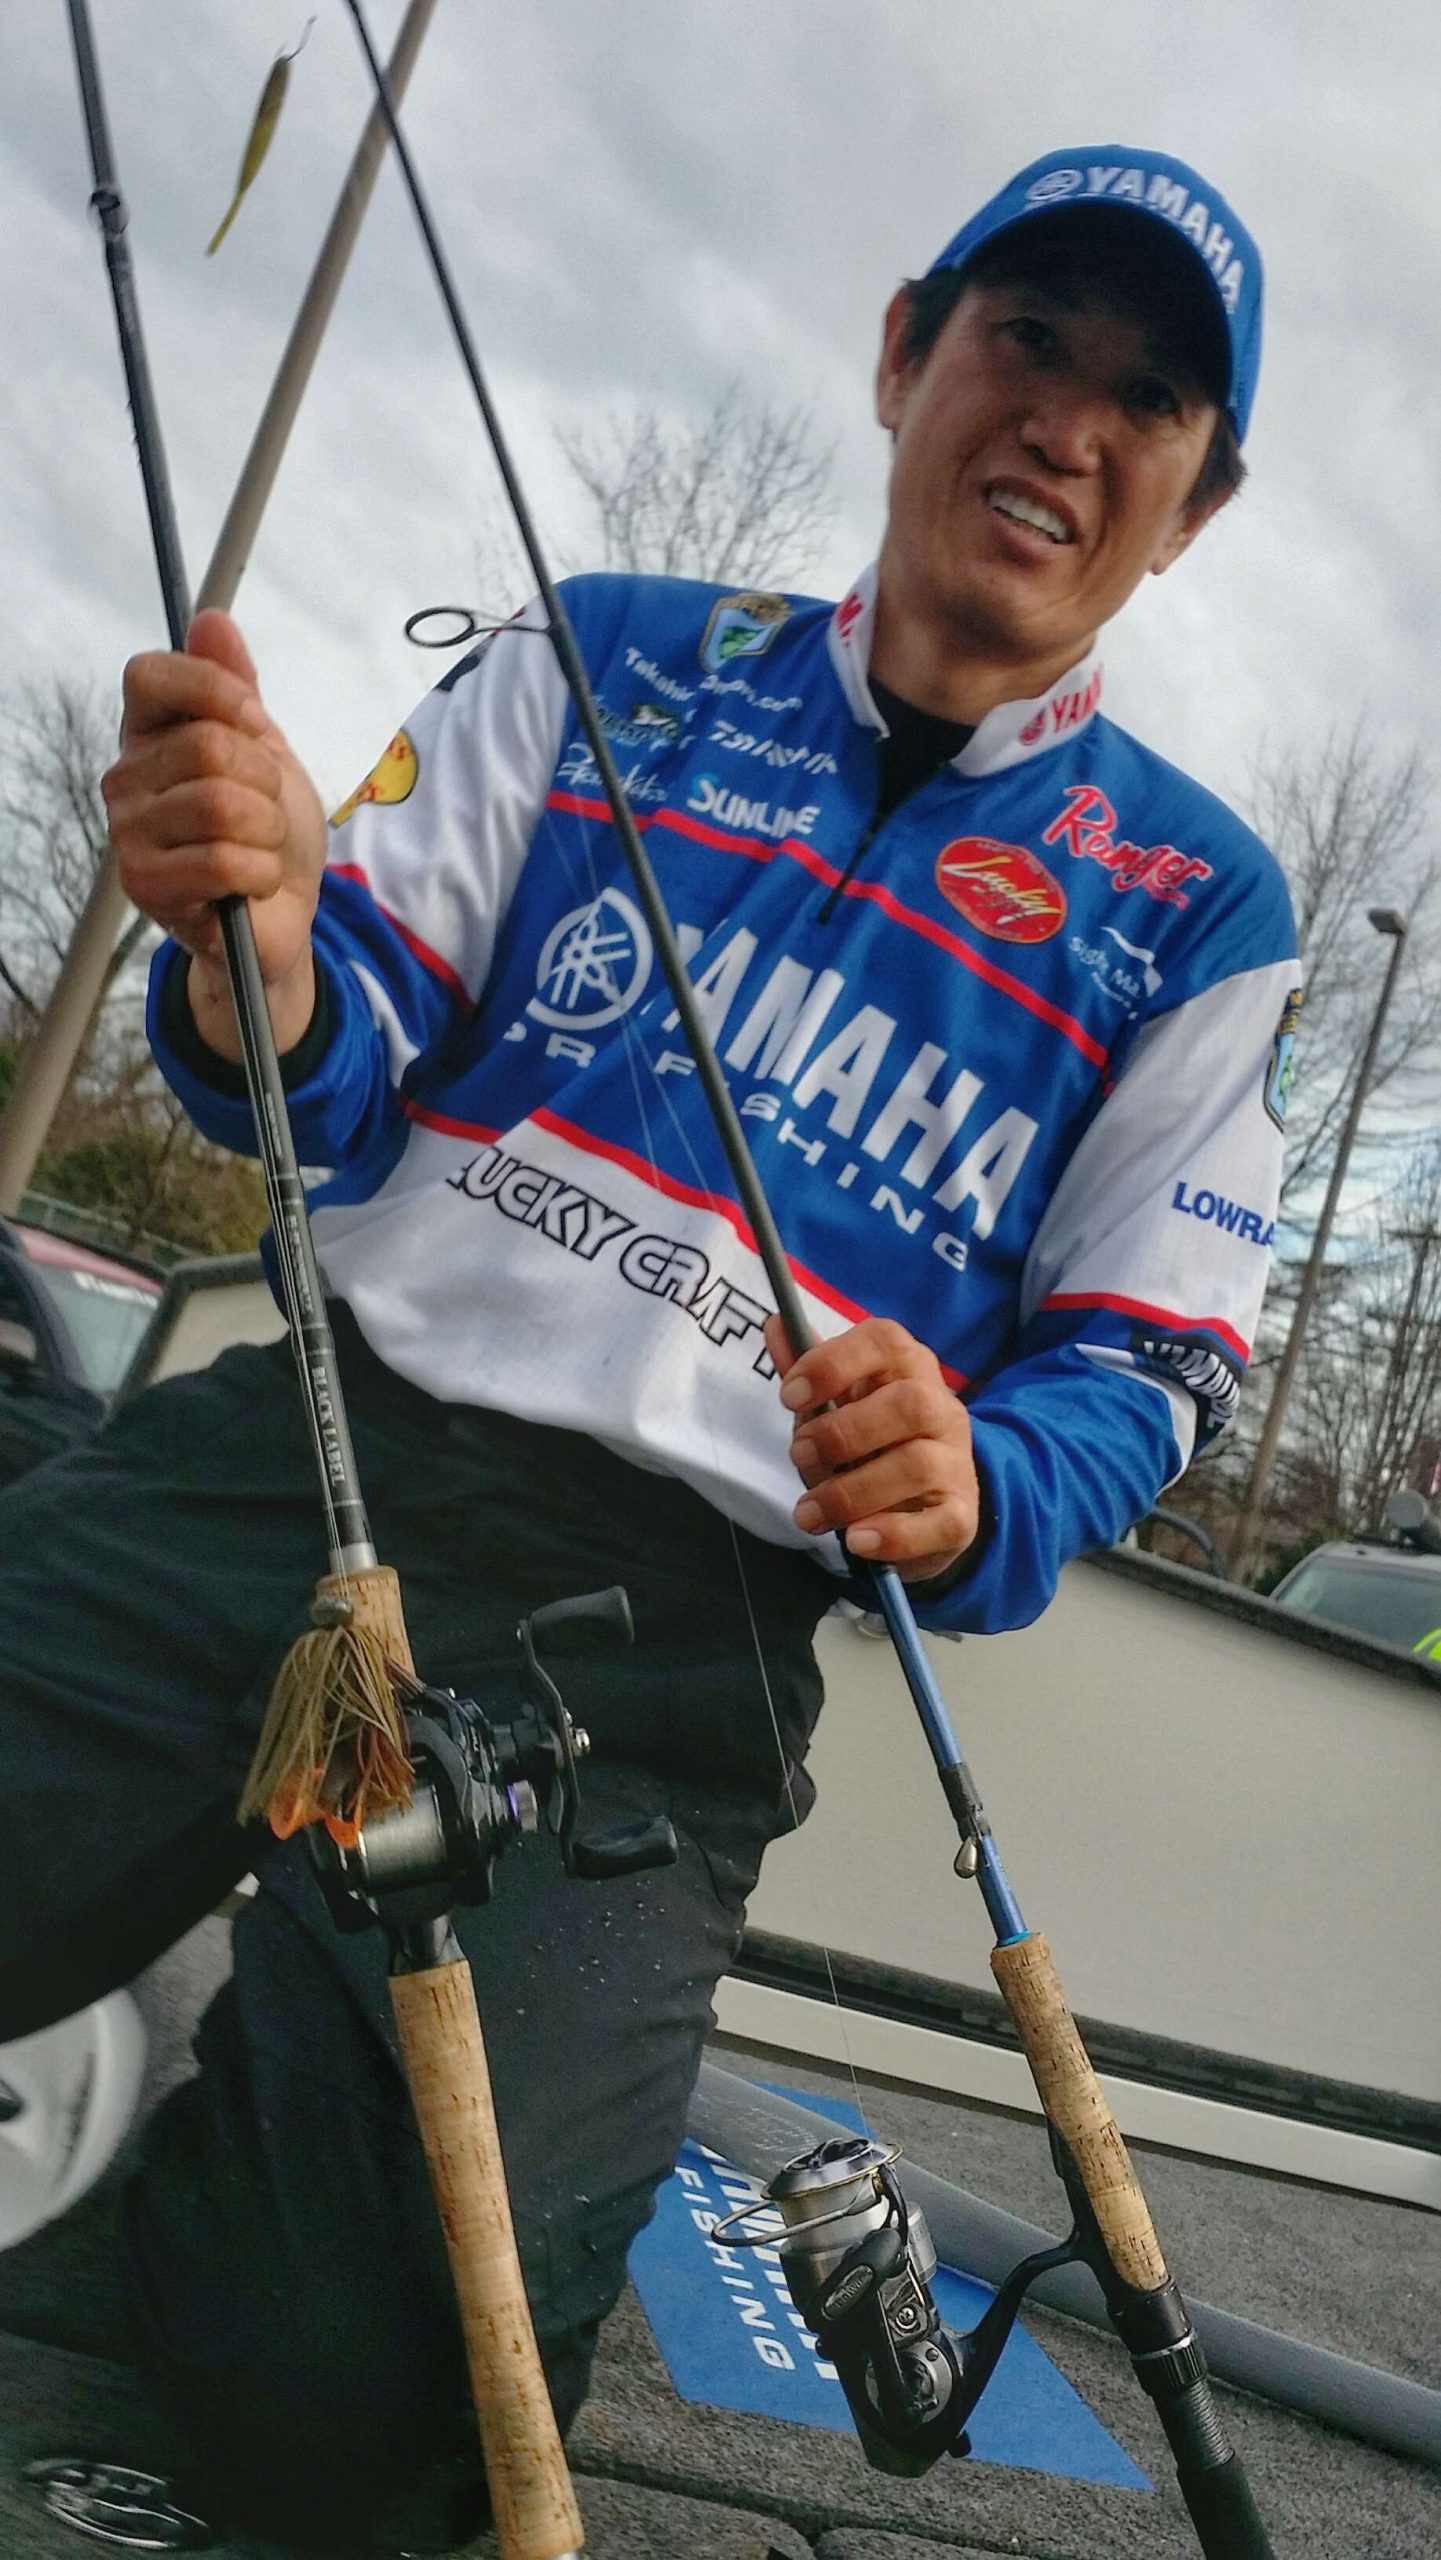 Takahiro Omori said he hated everything about fishing this Classic â fishing deep, fishing slow, cold water â but he adapted. He dropshotted a Yamamoto Shad Shape Worm (green pumpkin) and dragged a 3/4-oz football jig with a Yamamoto Double Tail (both green pumpkin) on main lake points in 40 feet with standing timber.